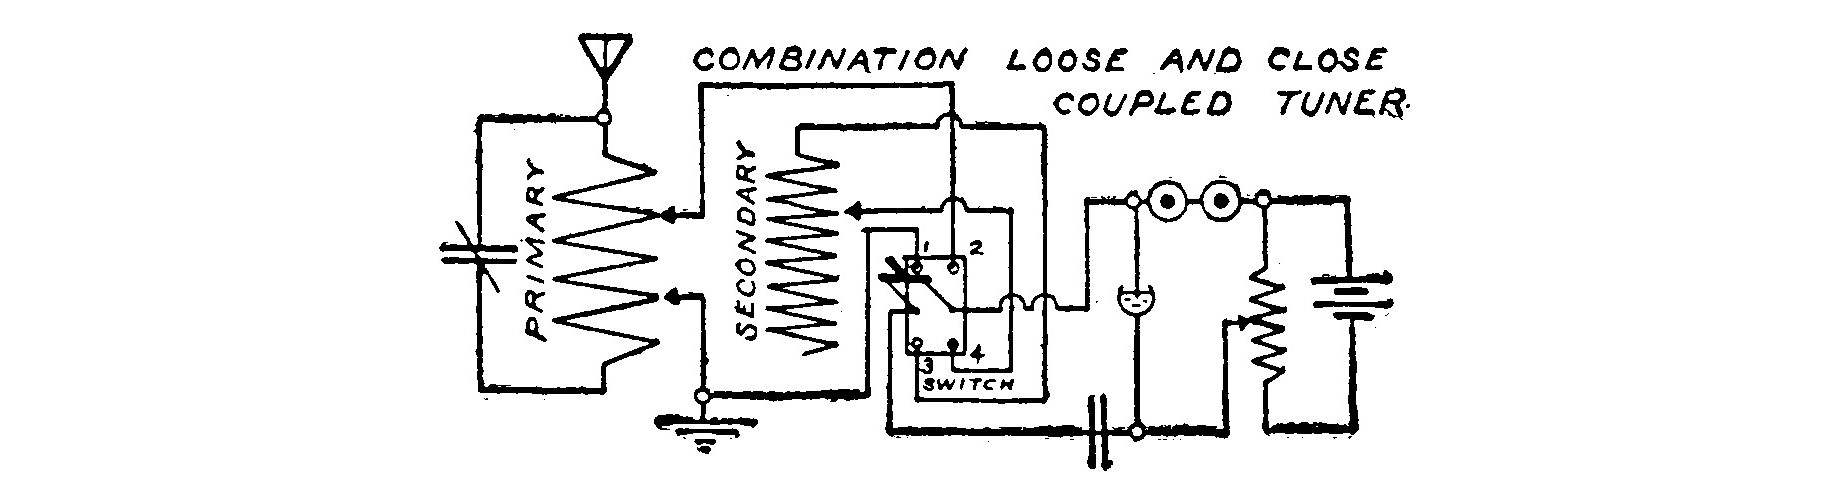 Fig. 132. Combination Loosely and Closely Coupled Tuner.